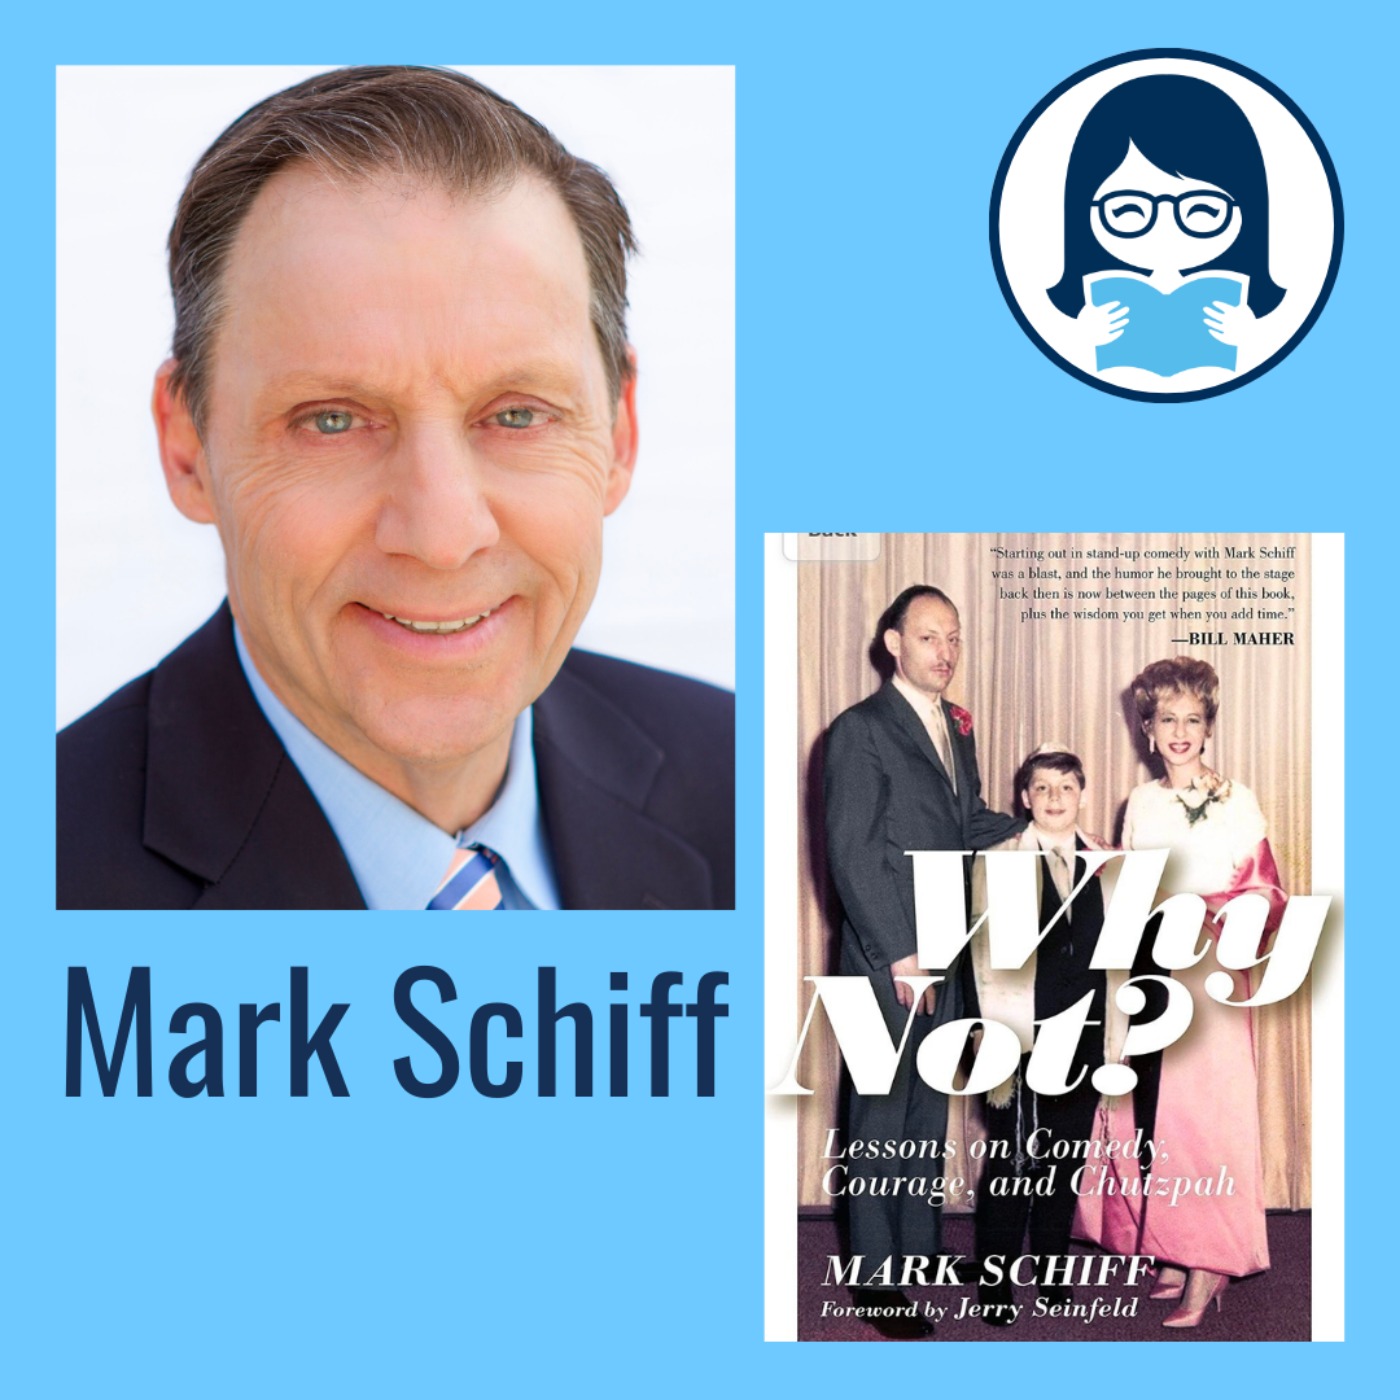 Mark Schiff, WHY NOT?: Lessons on Comedy, Courage, and Chutzpah